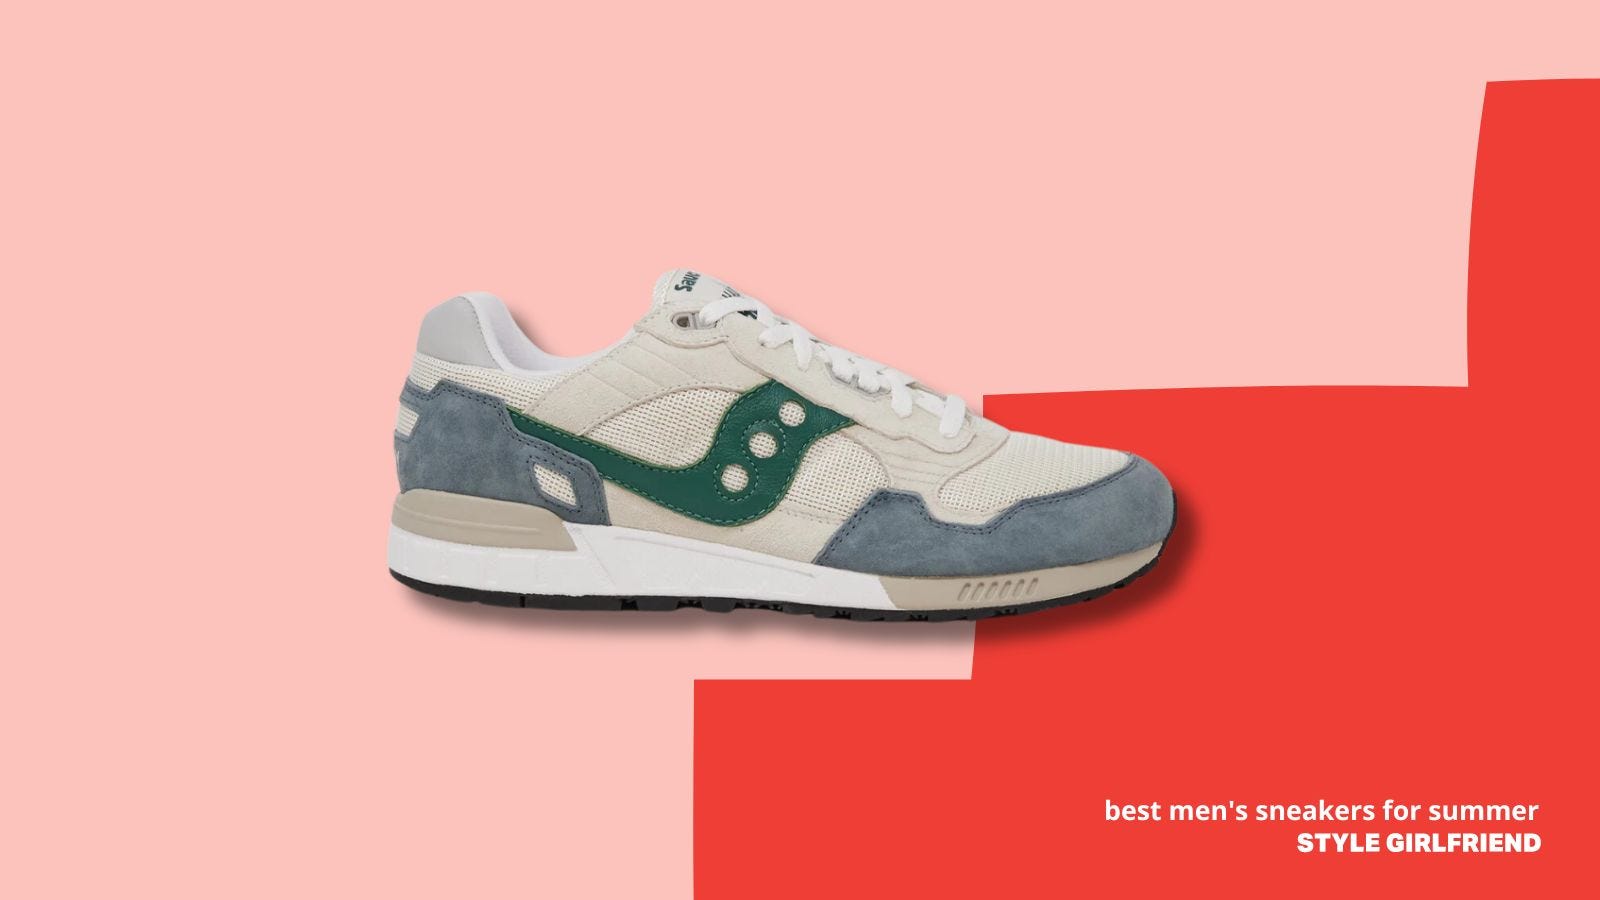 Saucony Shadow 50000 grey and green sneaker against a pink background. text on-screen reads: best men's sneakers for summer, Style Girlfriend 